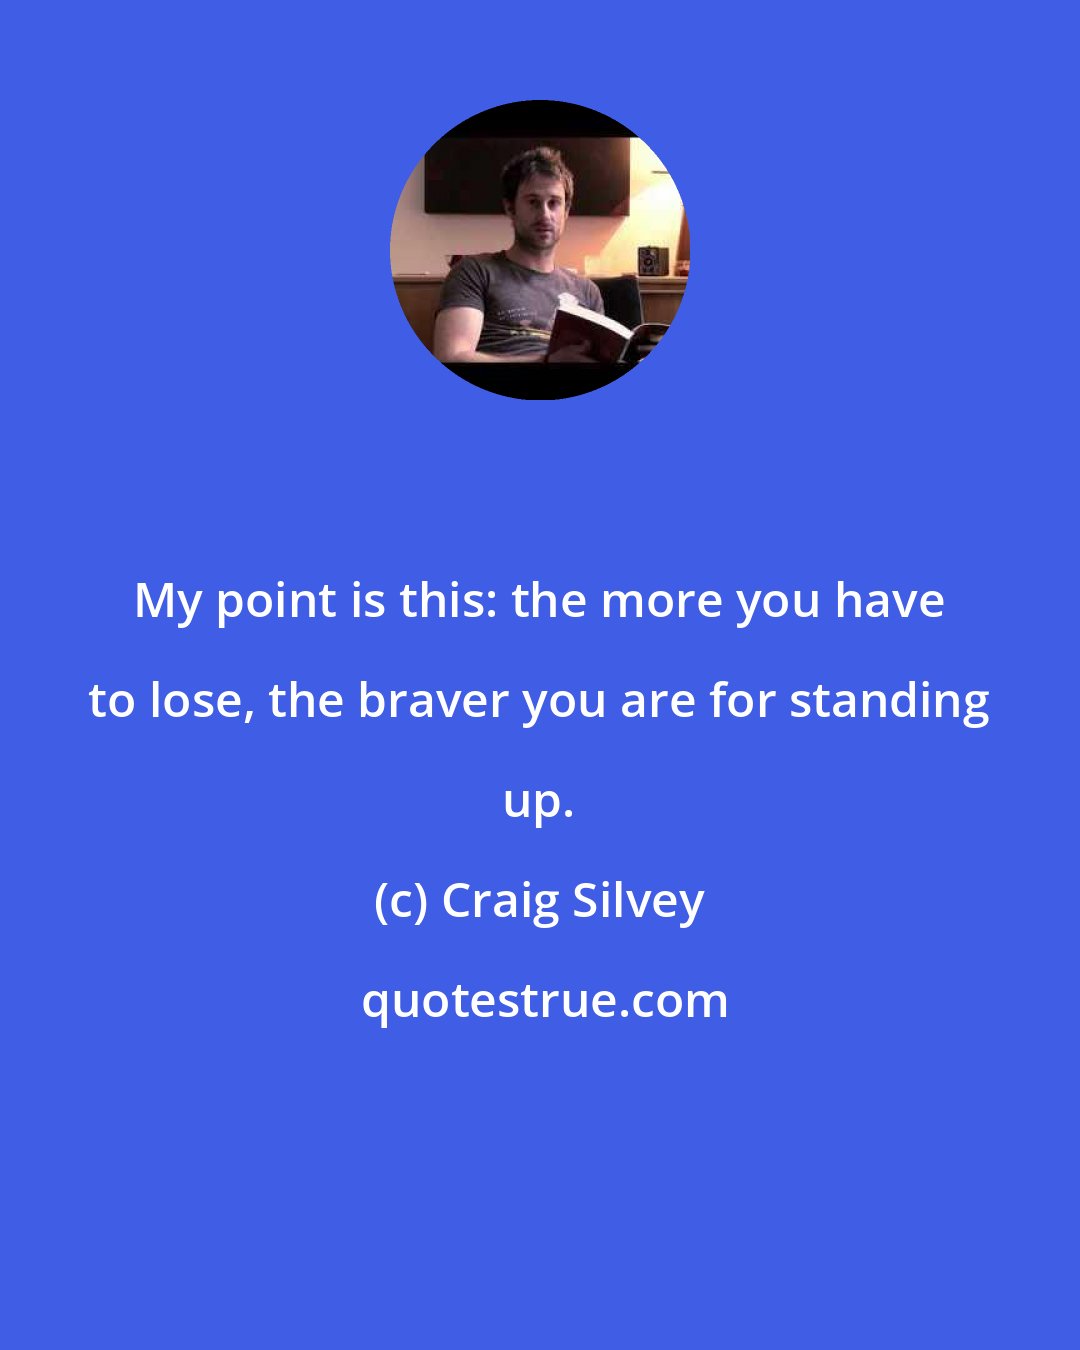 Craig Silvey: My point is this: the more you have to lose, the braver you are for standing up.